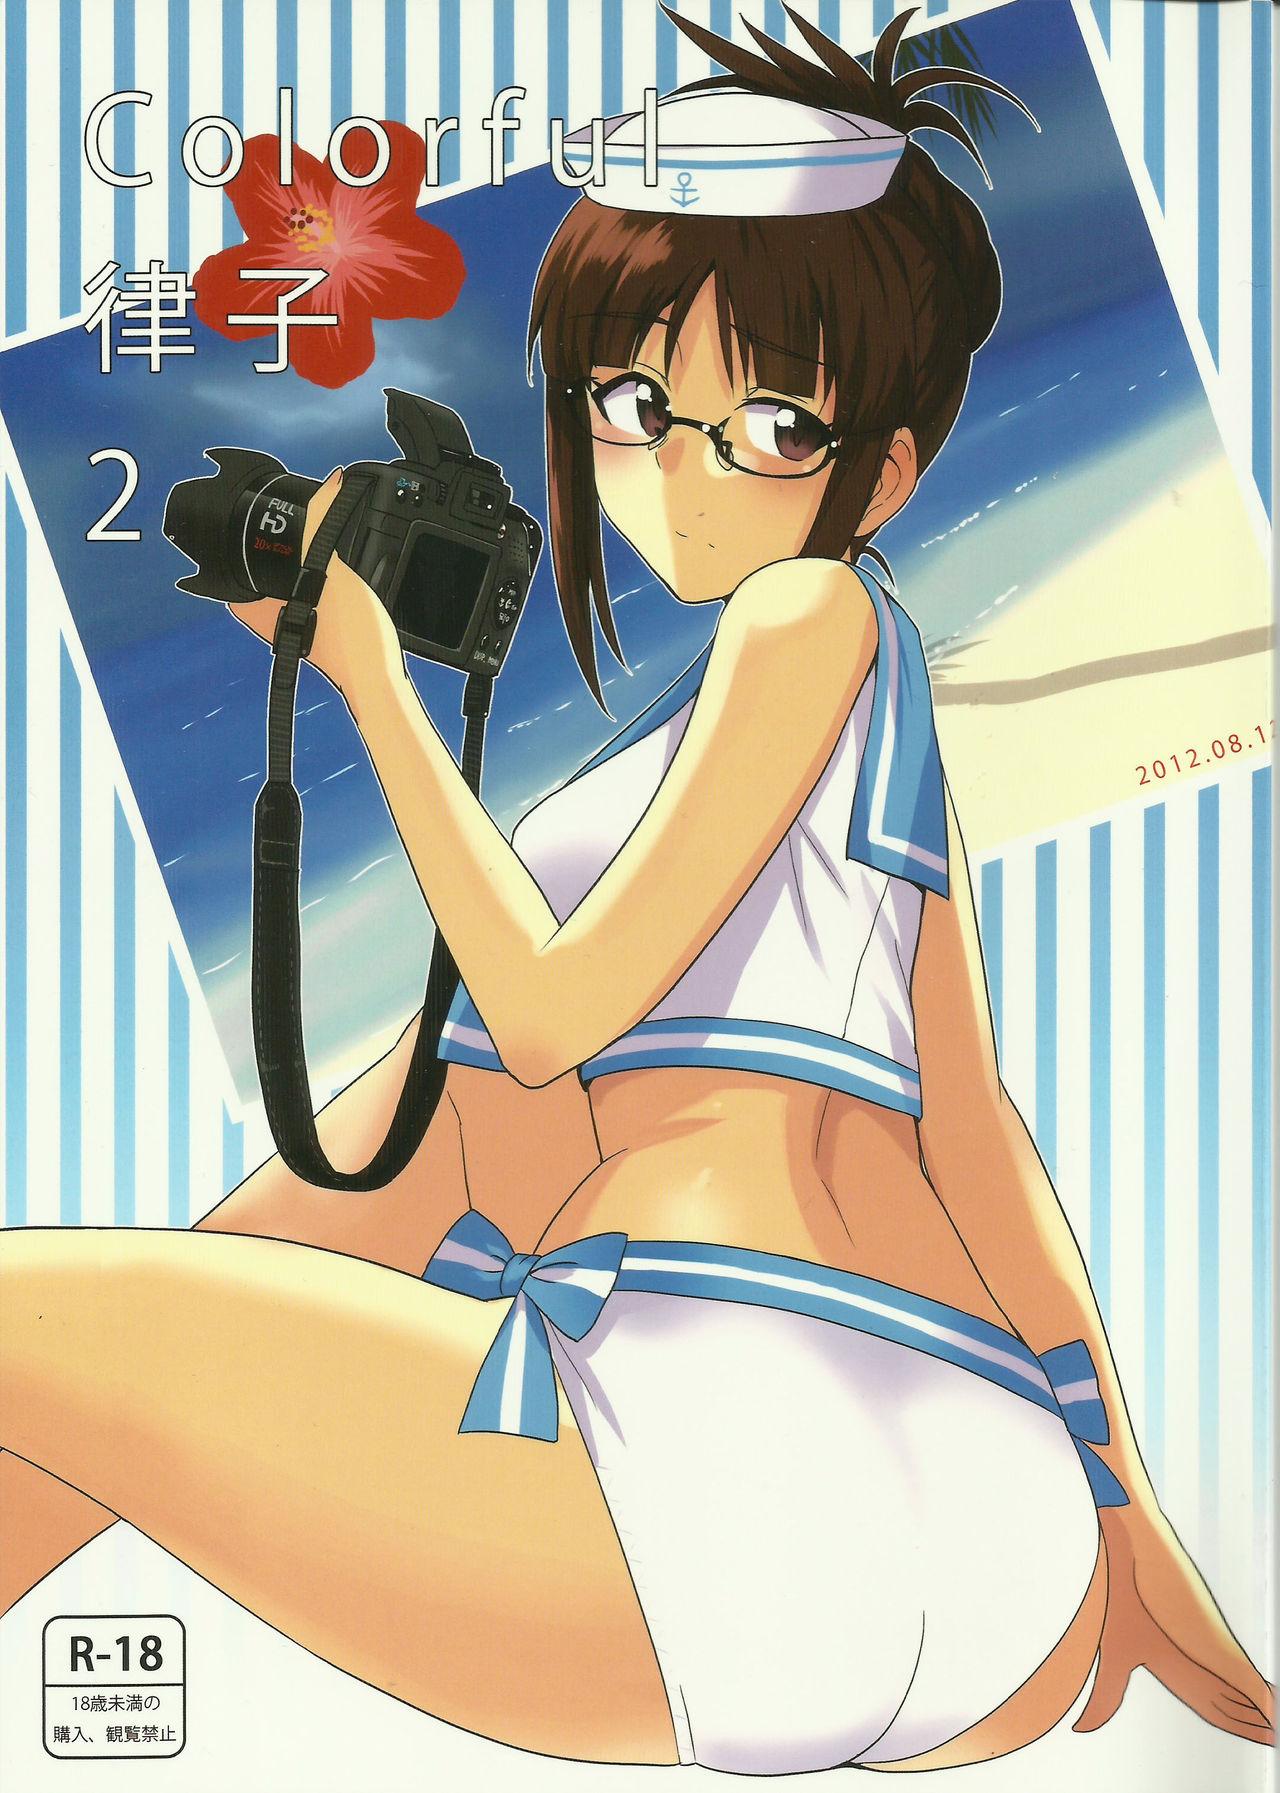 Atm Colorful Ritsuko 2 - The idolmaster Lady - Picture 1